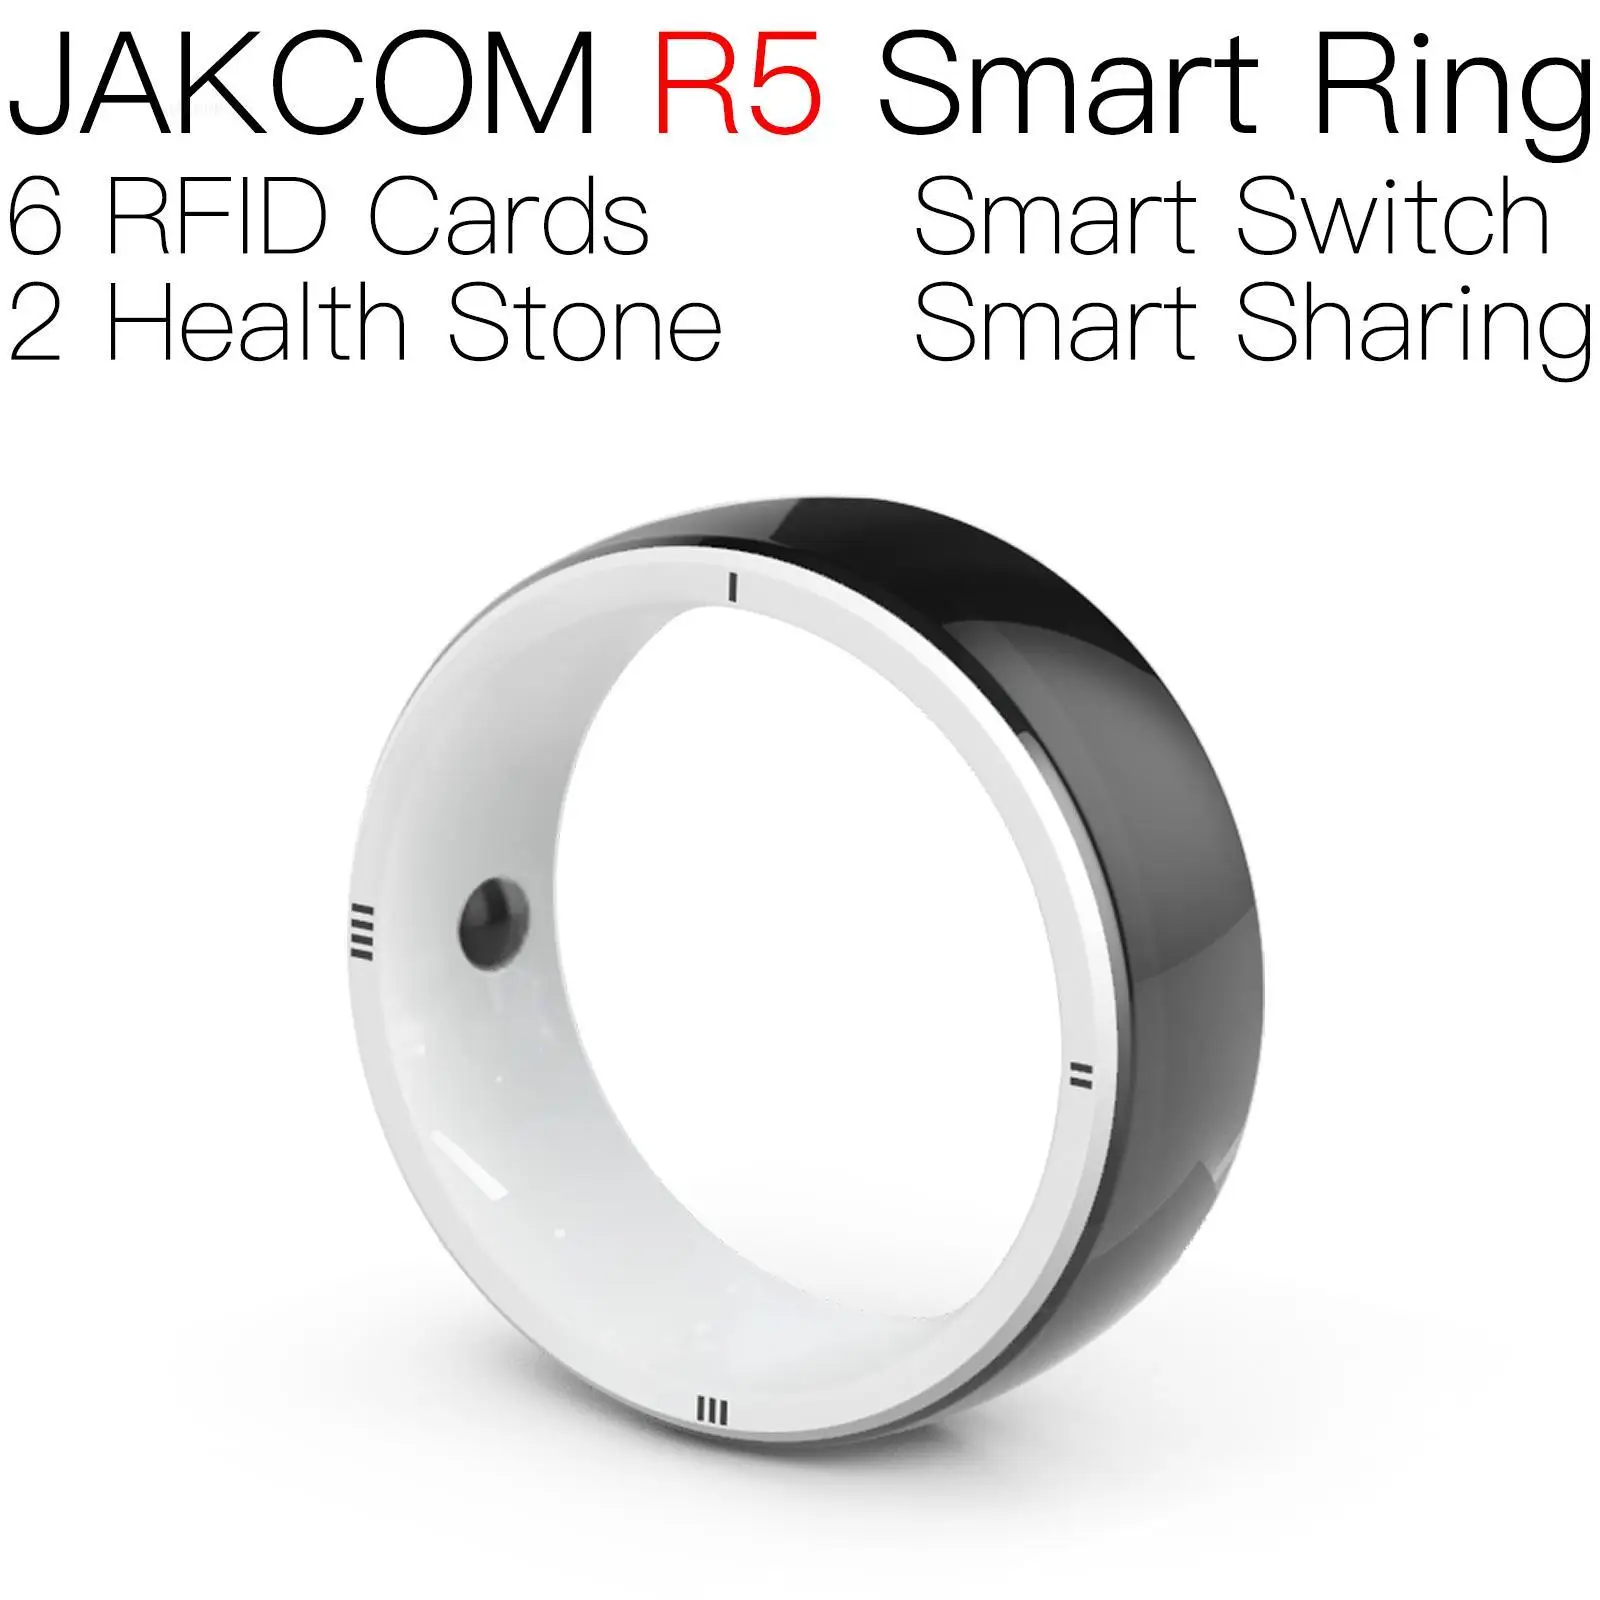 

JAKCOM R5 Smart Ring Newer than classic 1k uid writable key container tags smart card universal mobile chip prise usb c